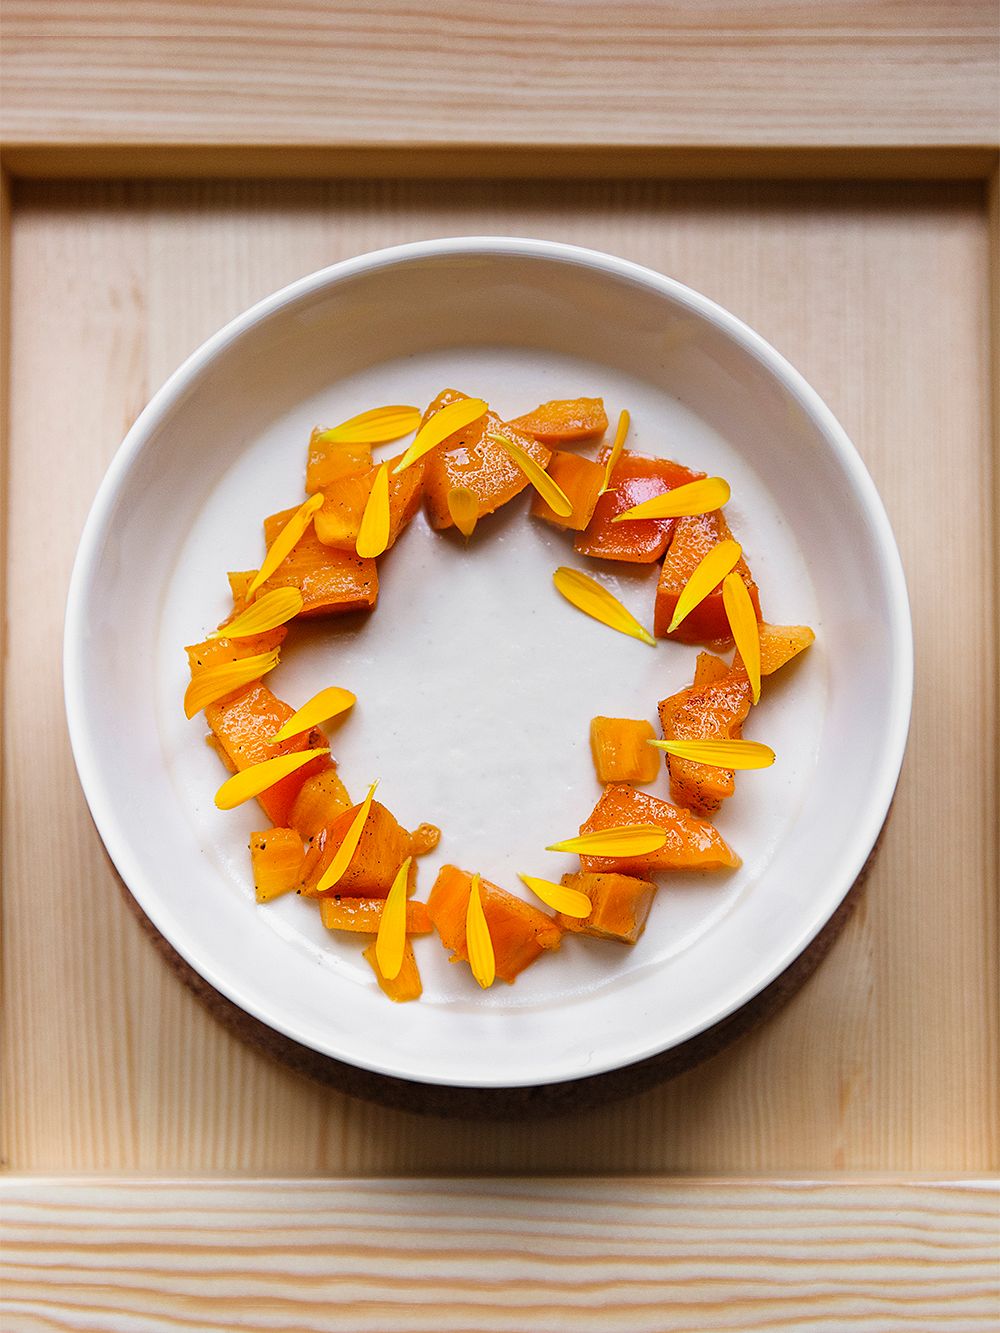 Pieces of persimmon on a plate